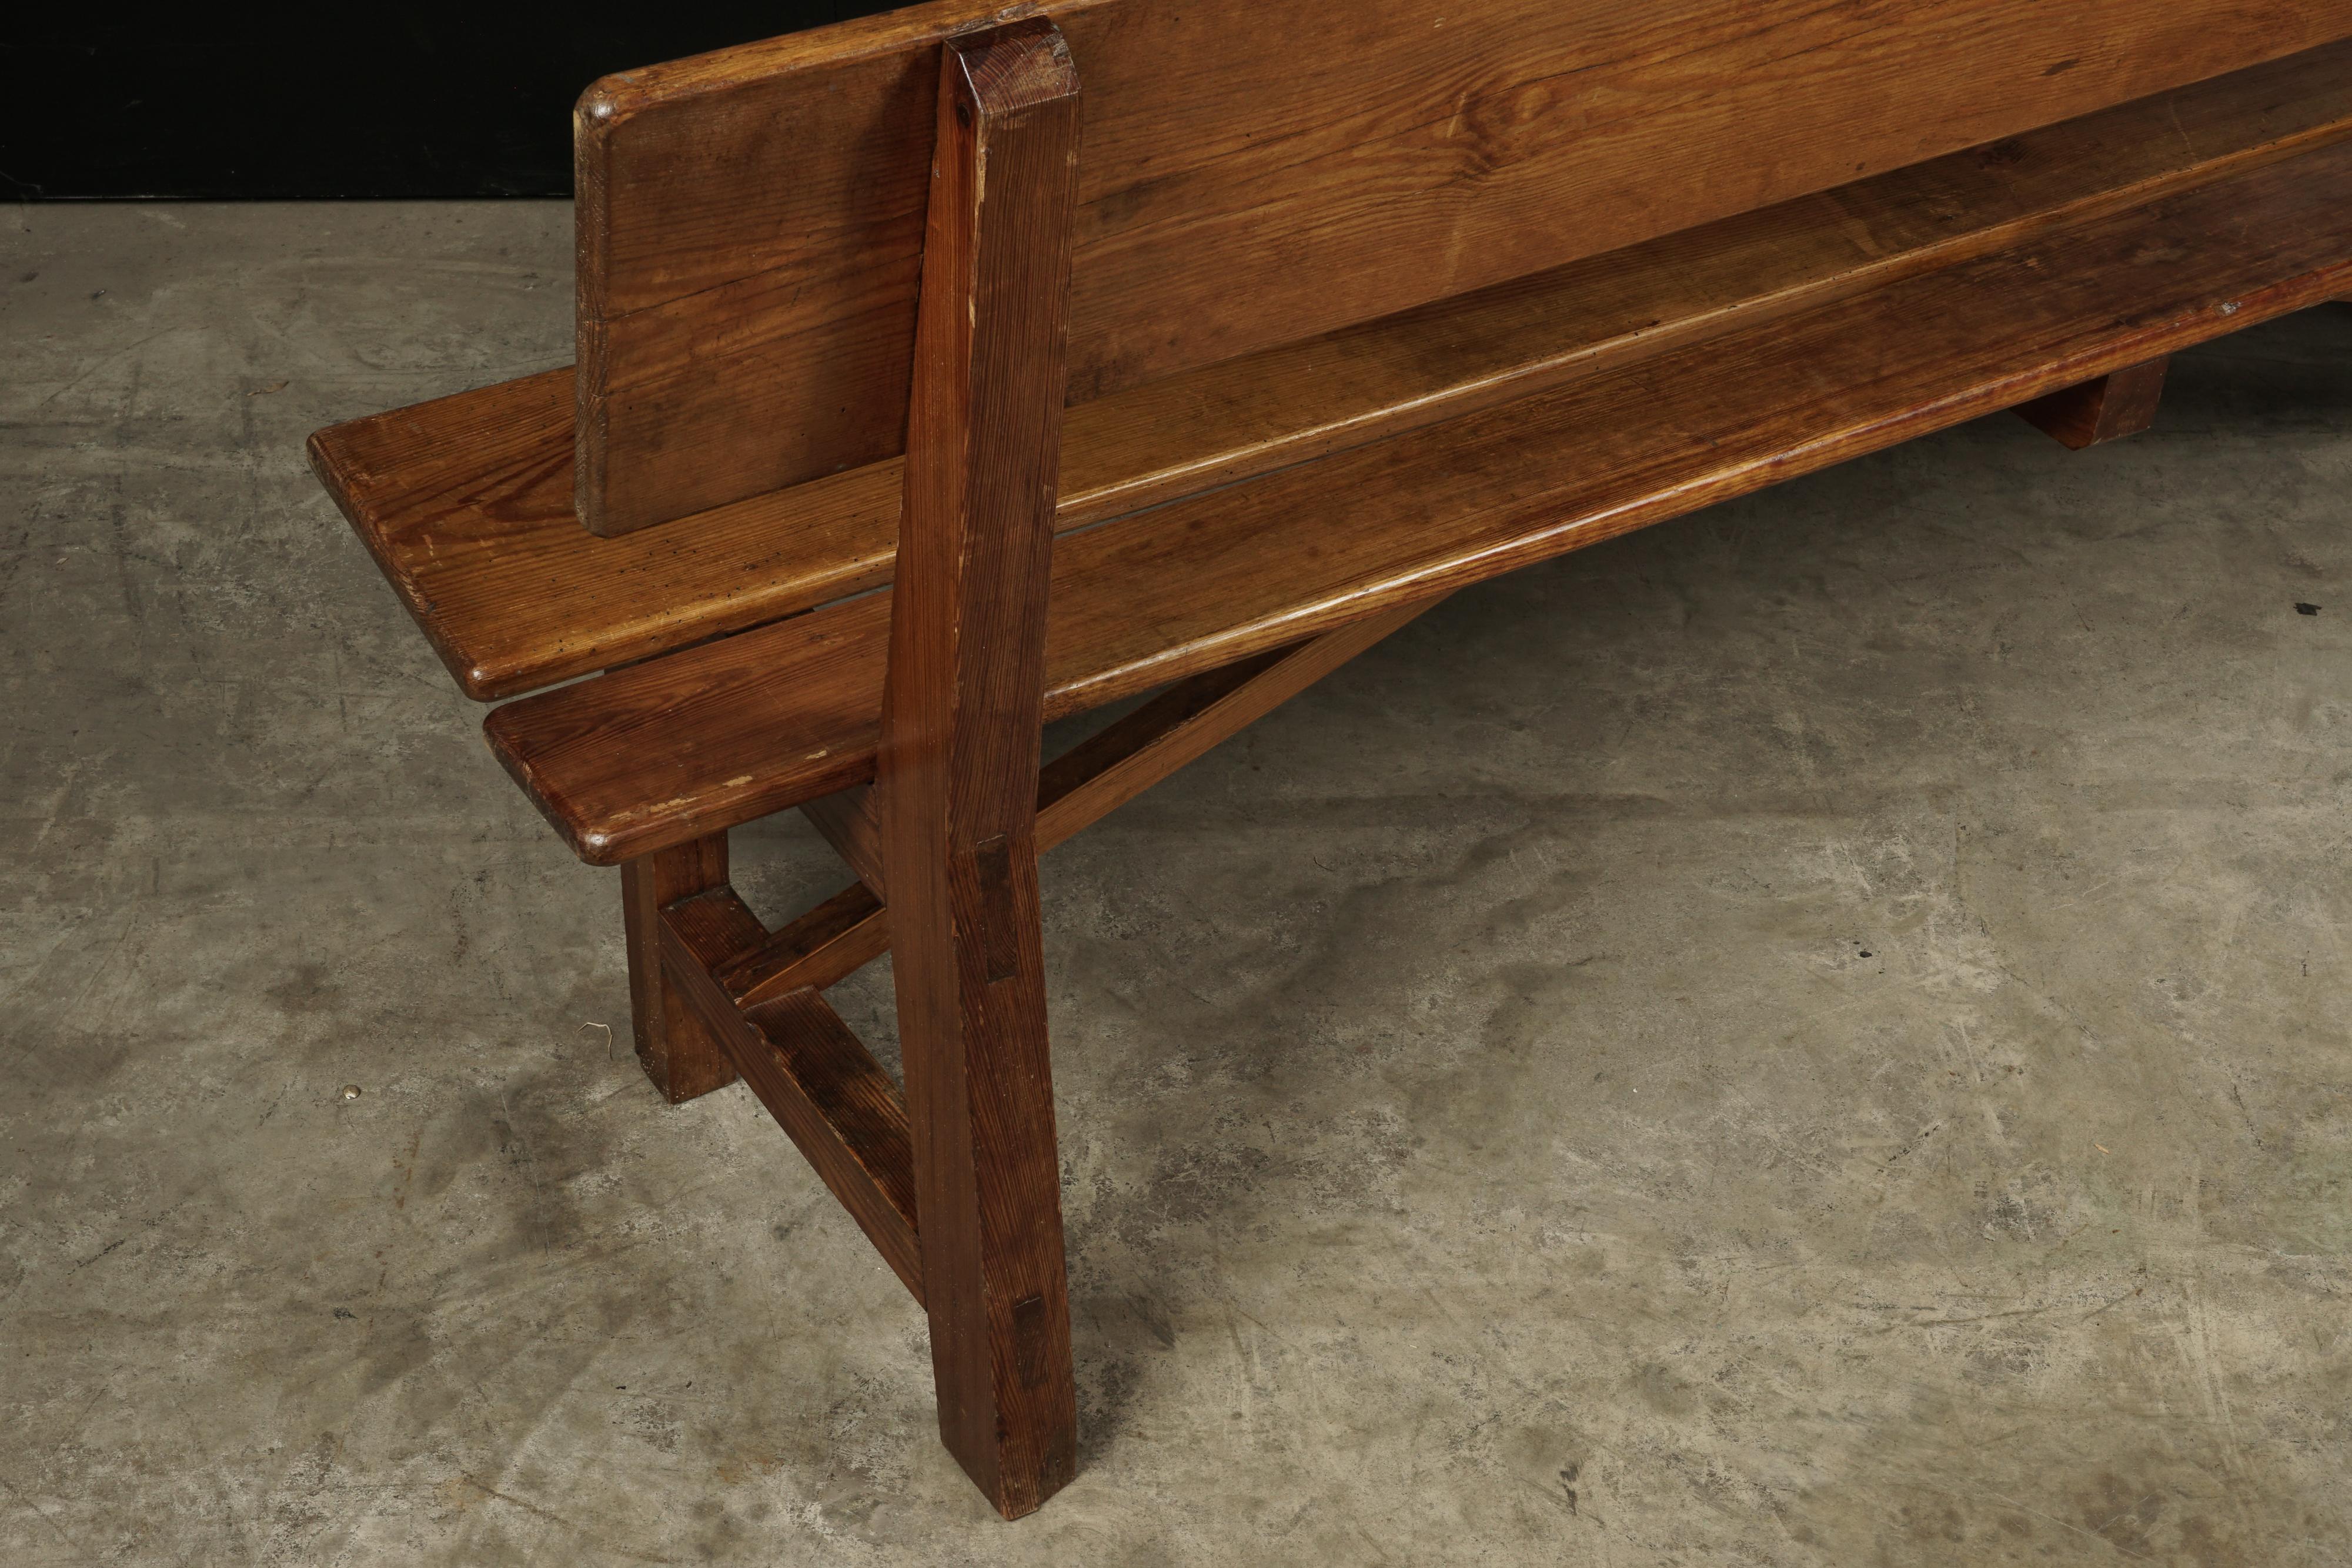 European Midcentury Pine Bench from France, circa 1970